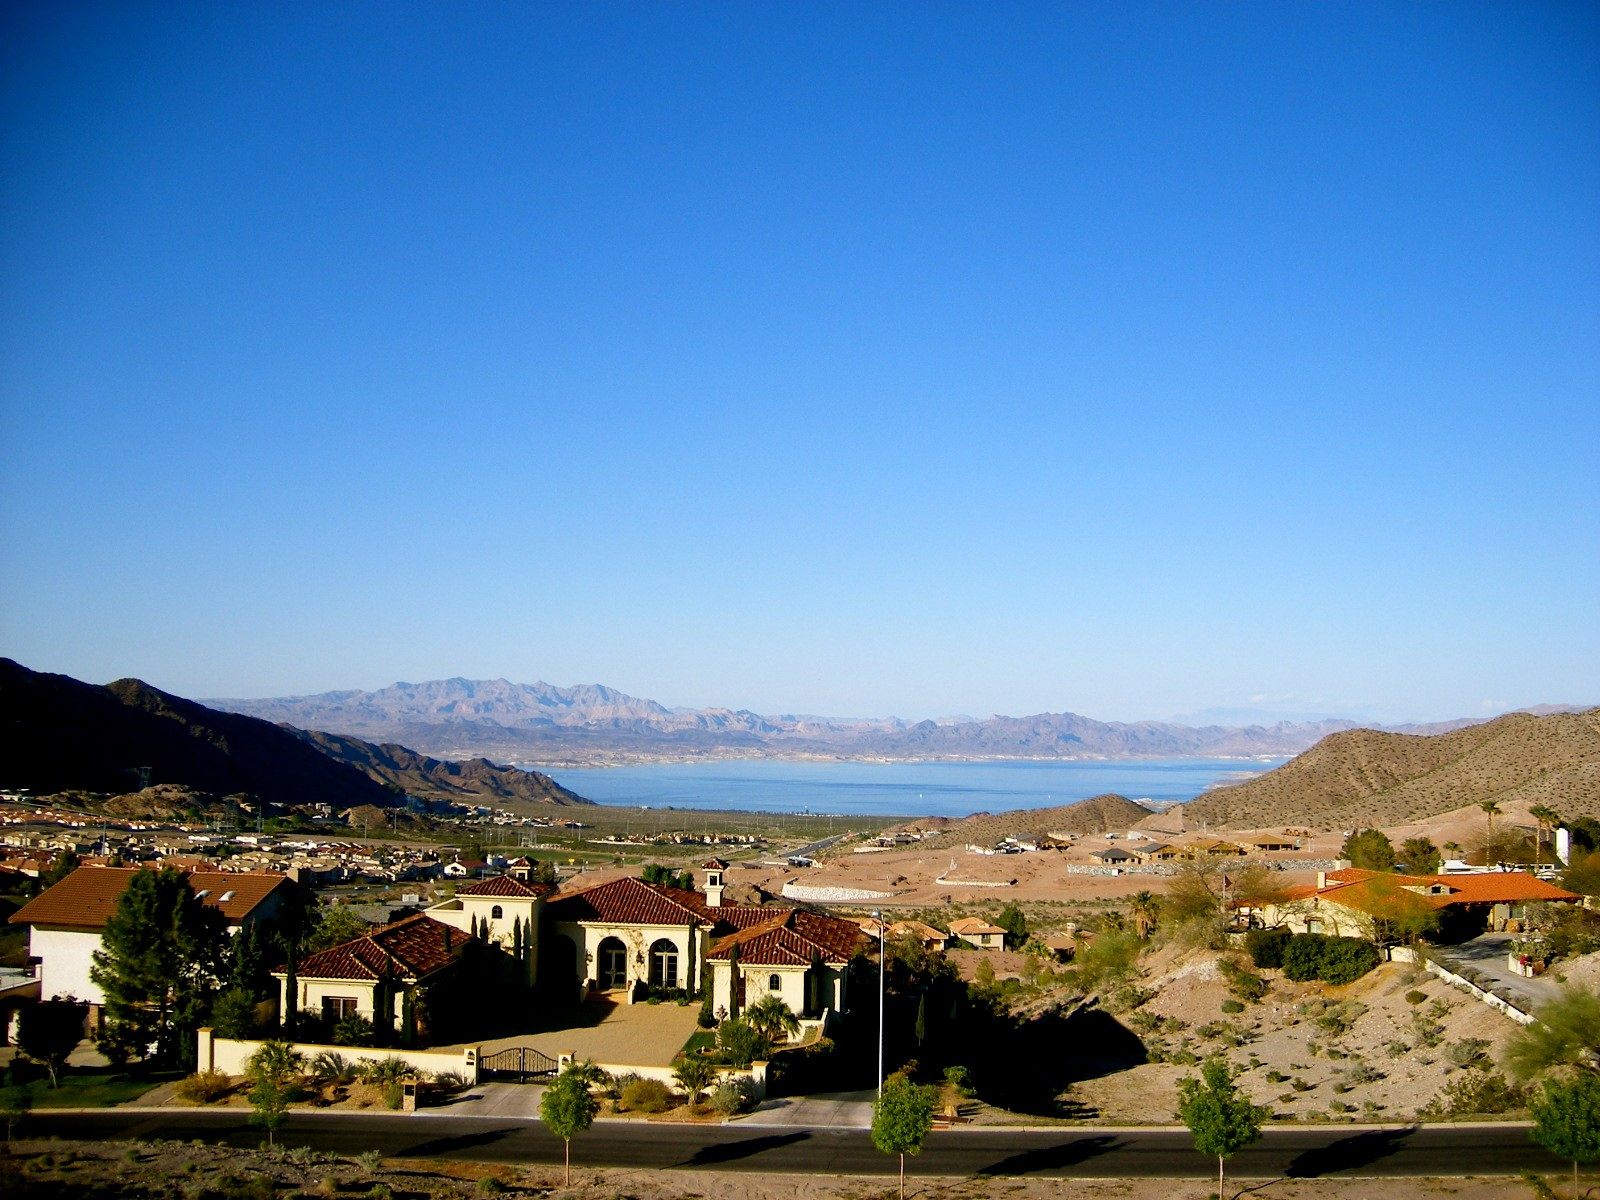 By Sarah Nichols from Las Vegas, NV, USA - Boulder City View of Lake MeadUploaded by PDTillman, CC BY-SA 2.0, https://commons.wikimedia.org/w/index.php?curid=6837763